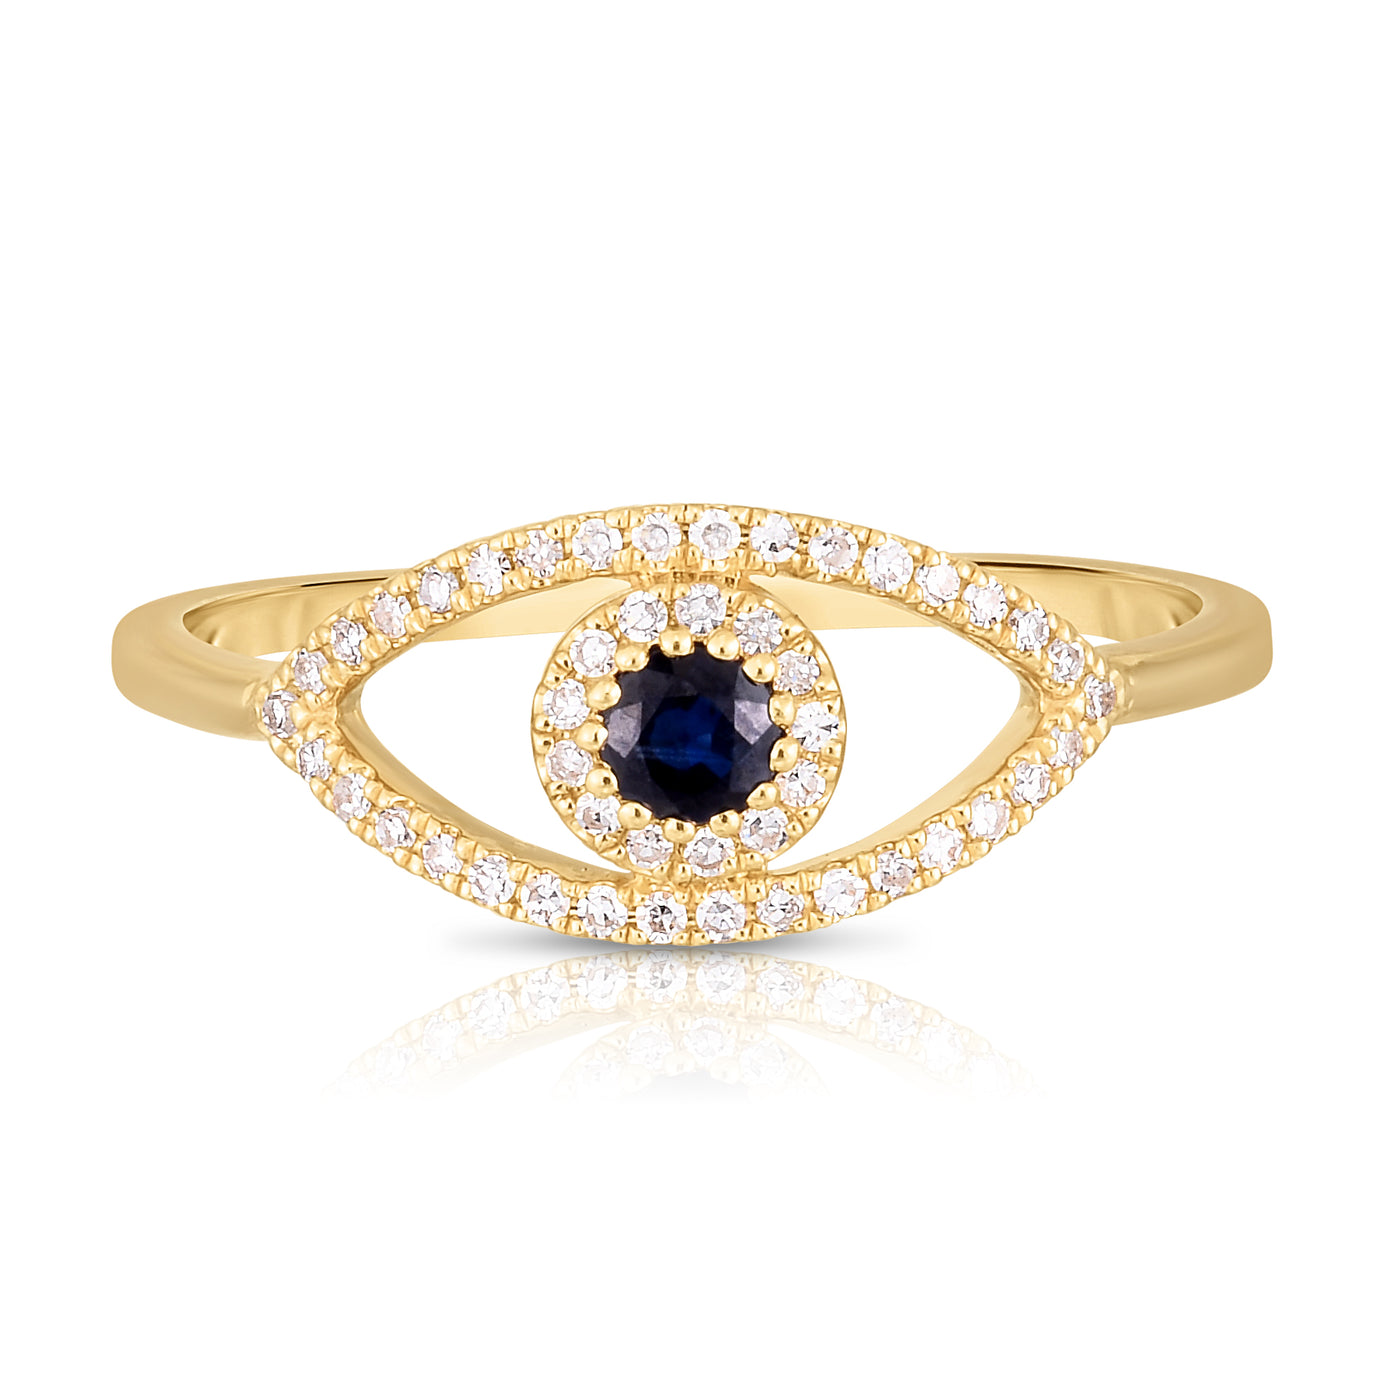 ALESSIA - The Evil Eye Ring